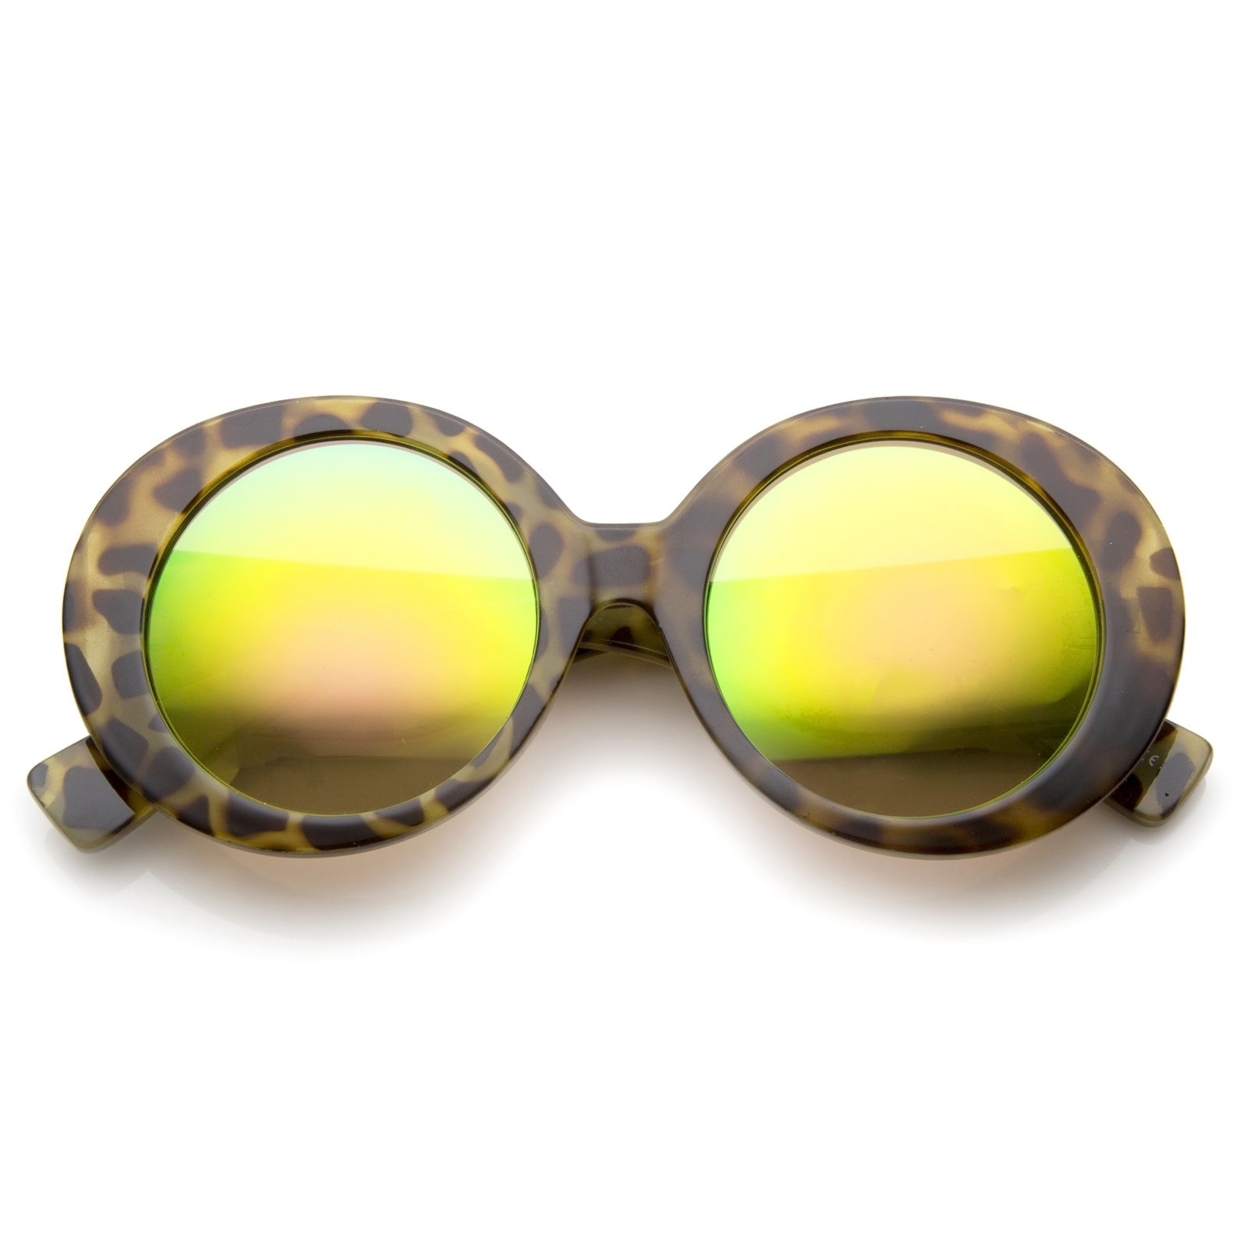 High Fashion Chunky Colored Mirror Round Oversize Sunglasses 50mm - Tortoise / Pink-Green Mirror